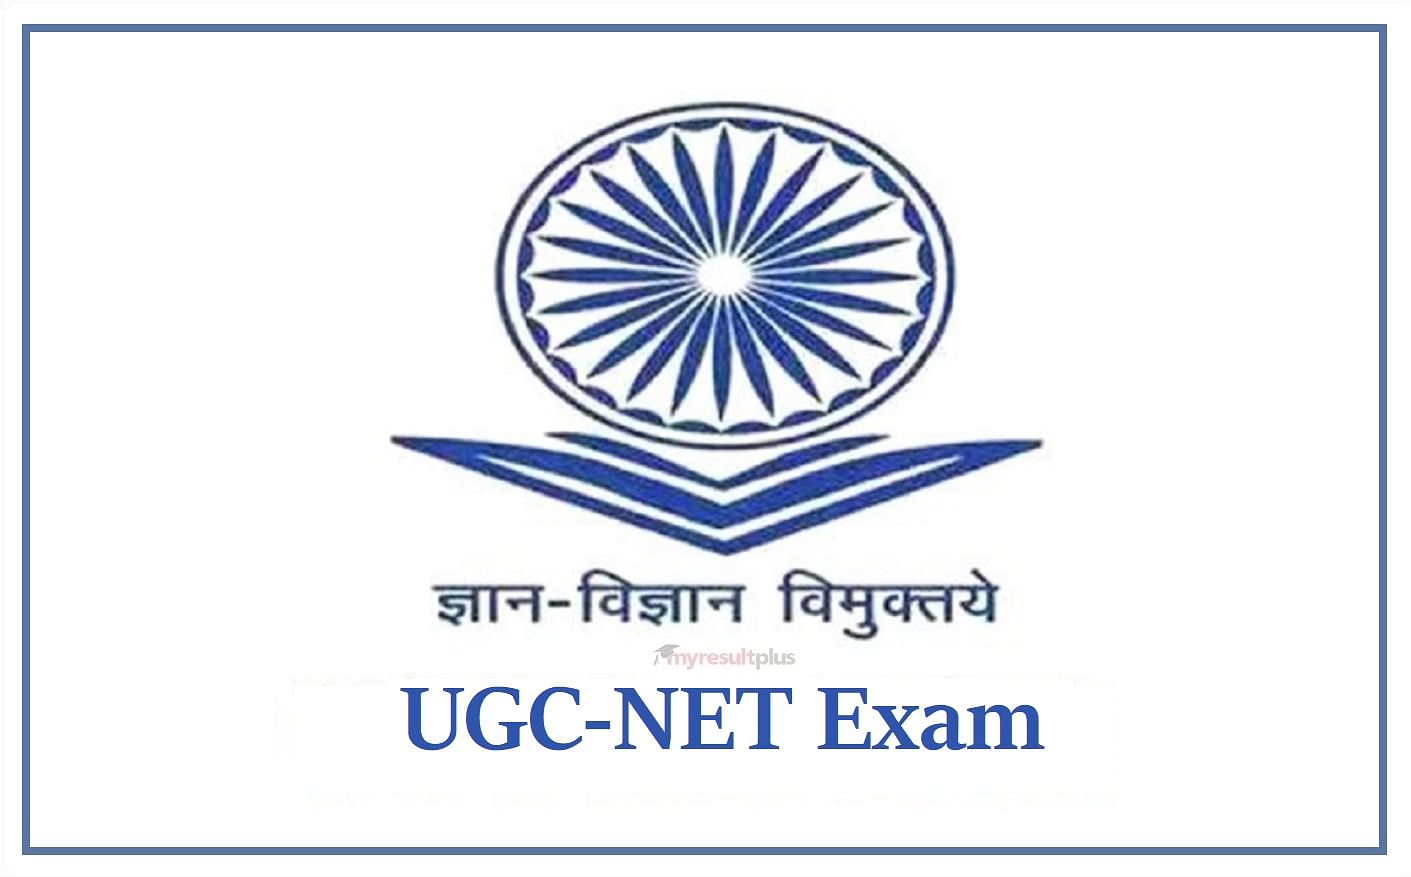 UGC NET 2021 Result Likely Soon, Read Complete Official Notice Here